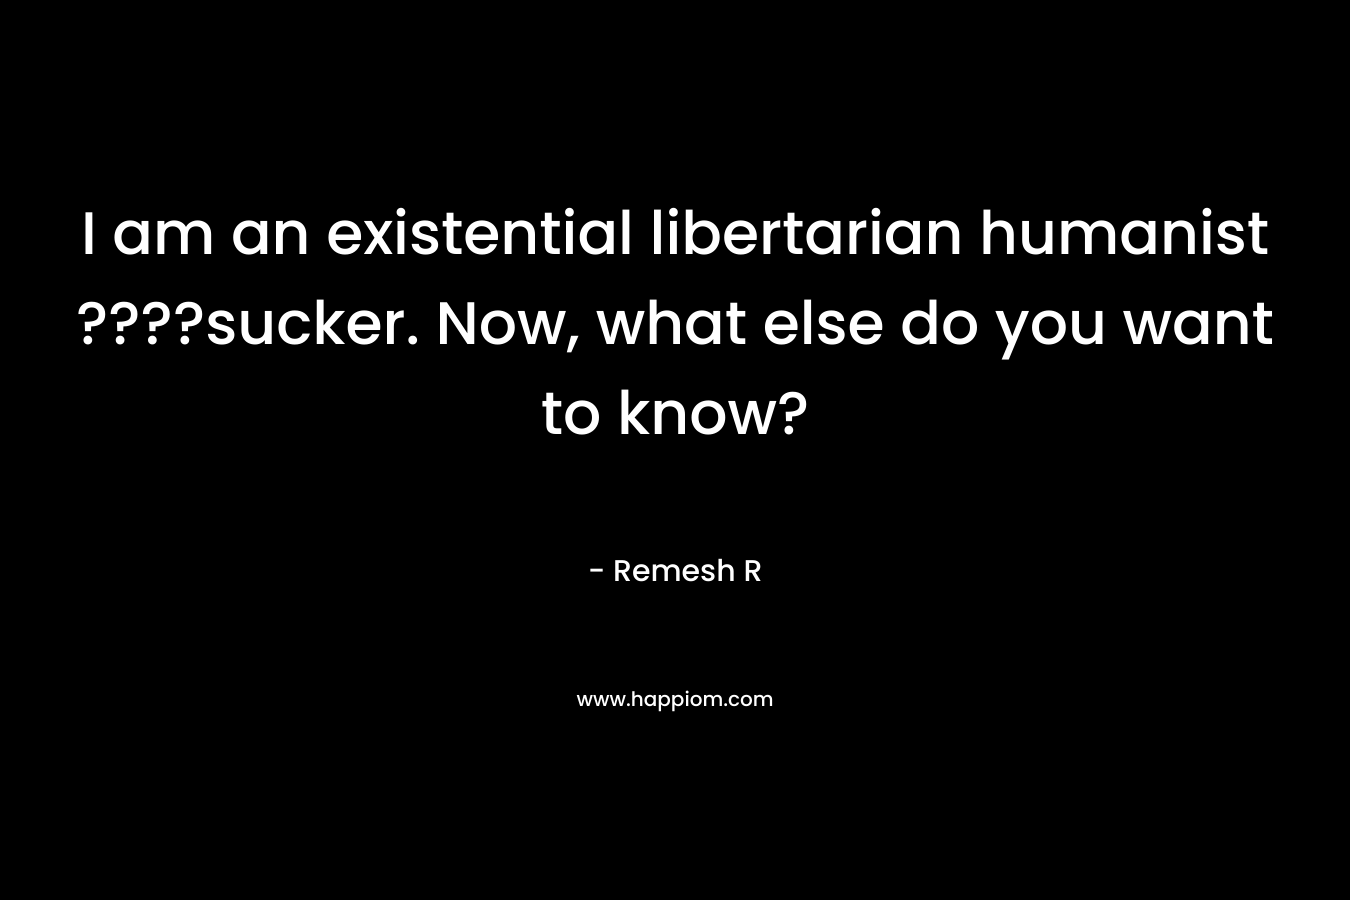 I am an existential libertarian humanist ????sucker. Now, what else do you want to know?